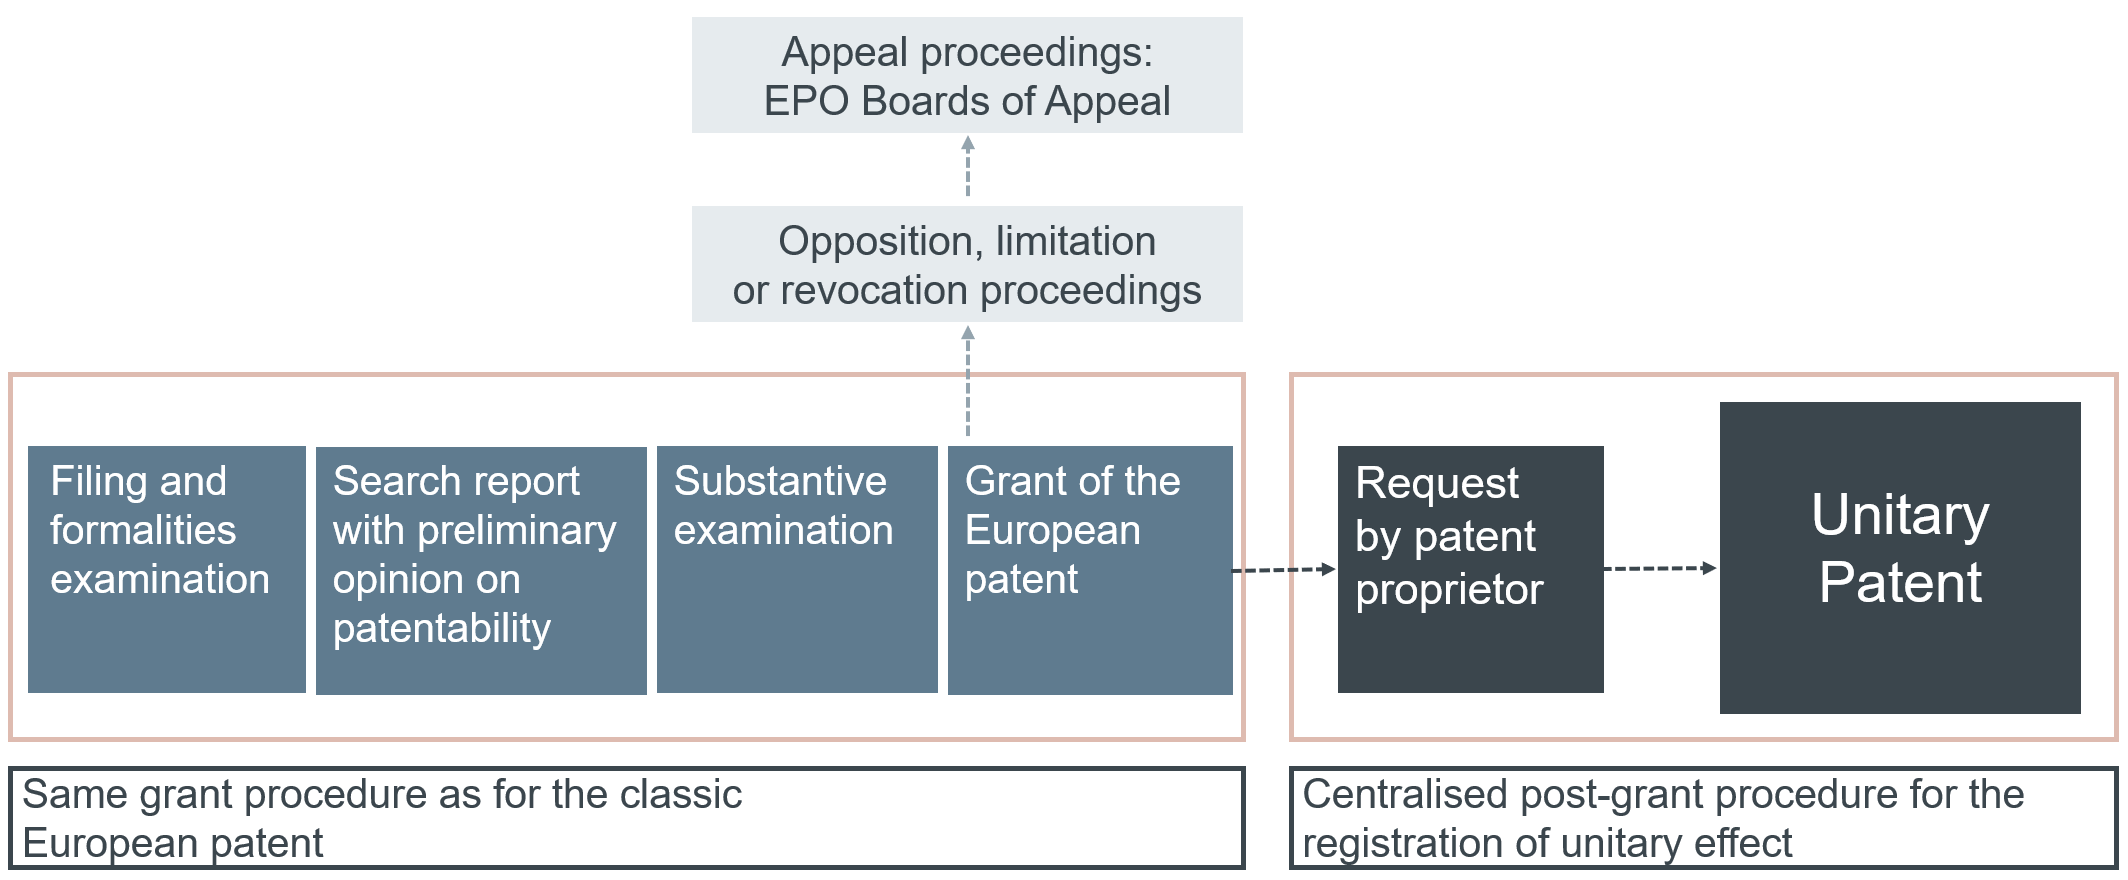 The Unitary Patent architecture
19A Unitary Patent is a "European patent with unitary effect",...